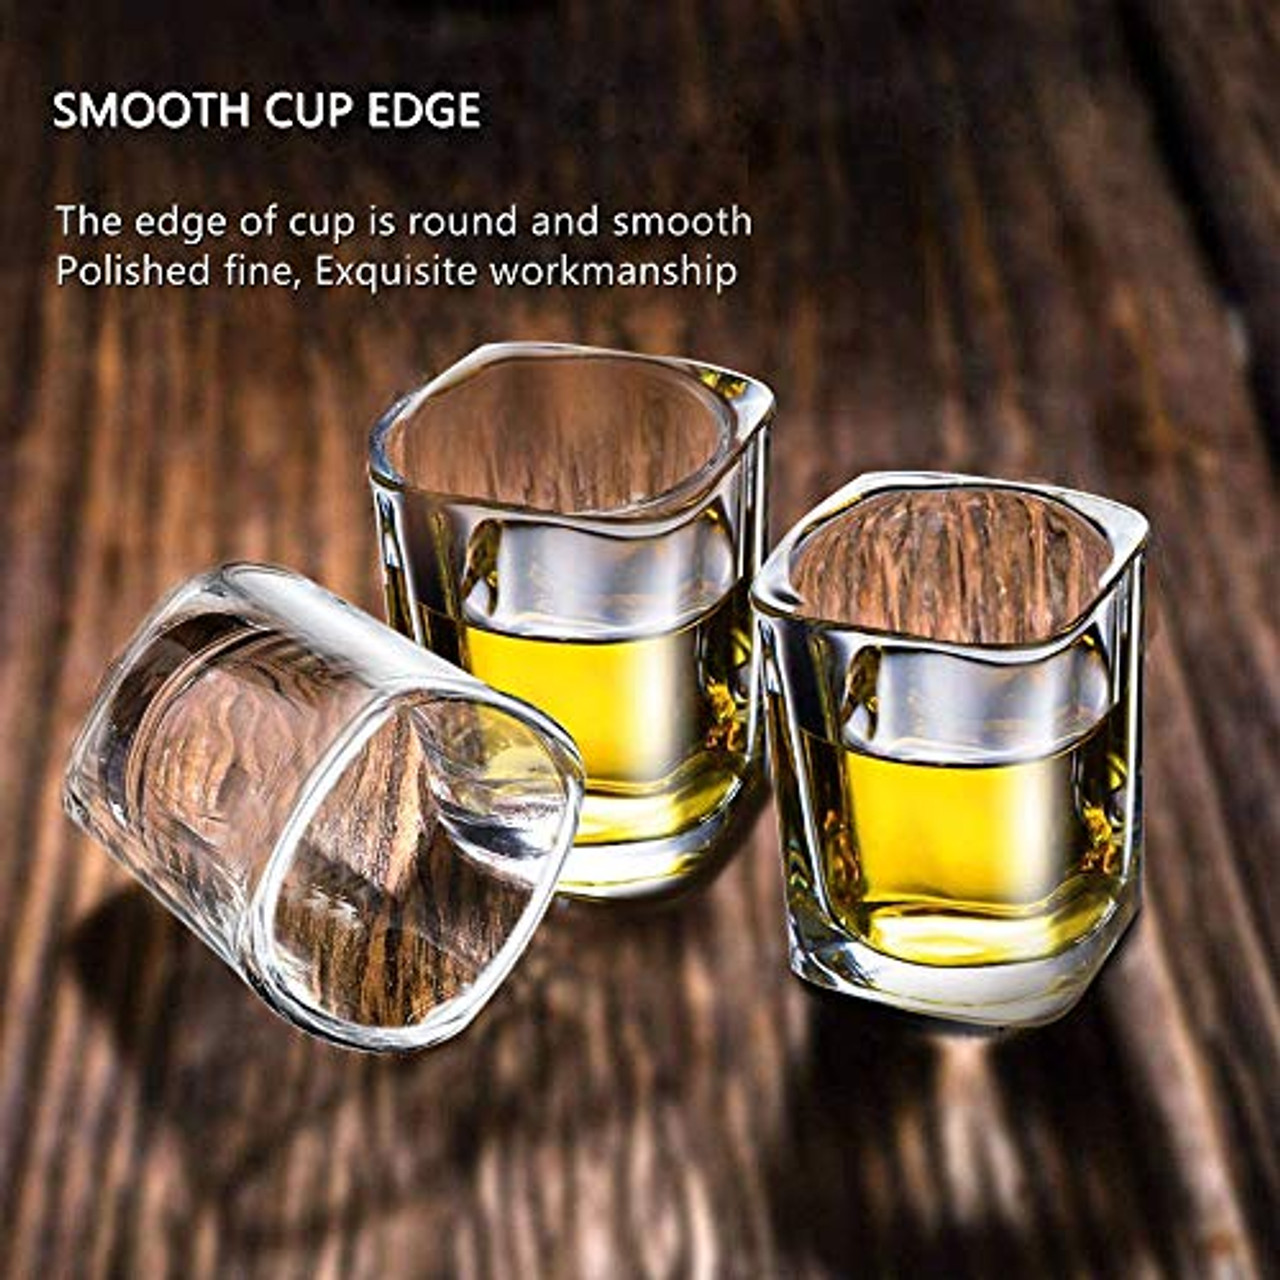 6 Pack Shot Glasses Set Clear Mini Mason Jars Wine Glass Party Cups Catering Bar